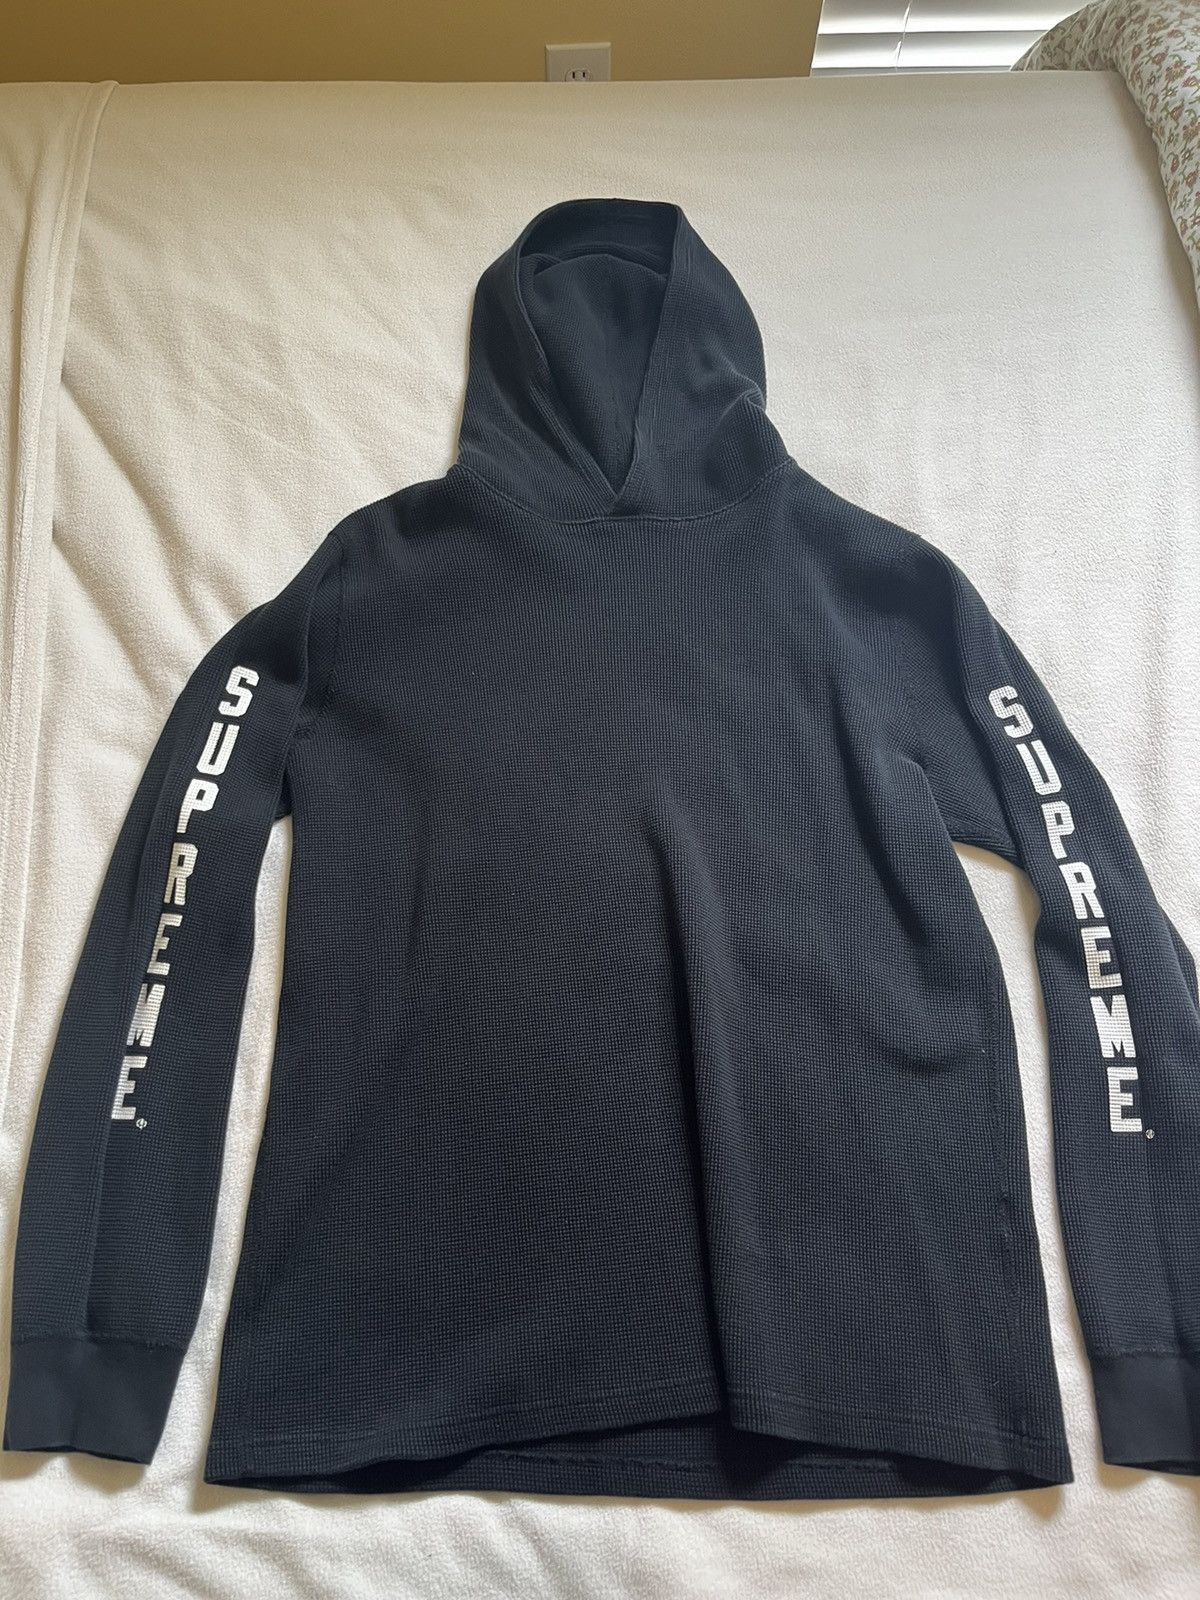 Supreme Hooded Waffle Thermal | Grailed